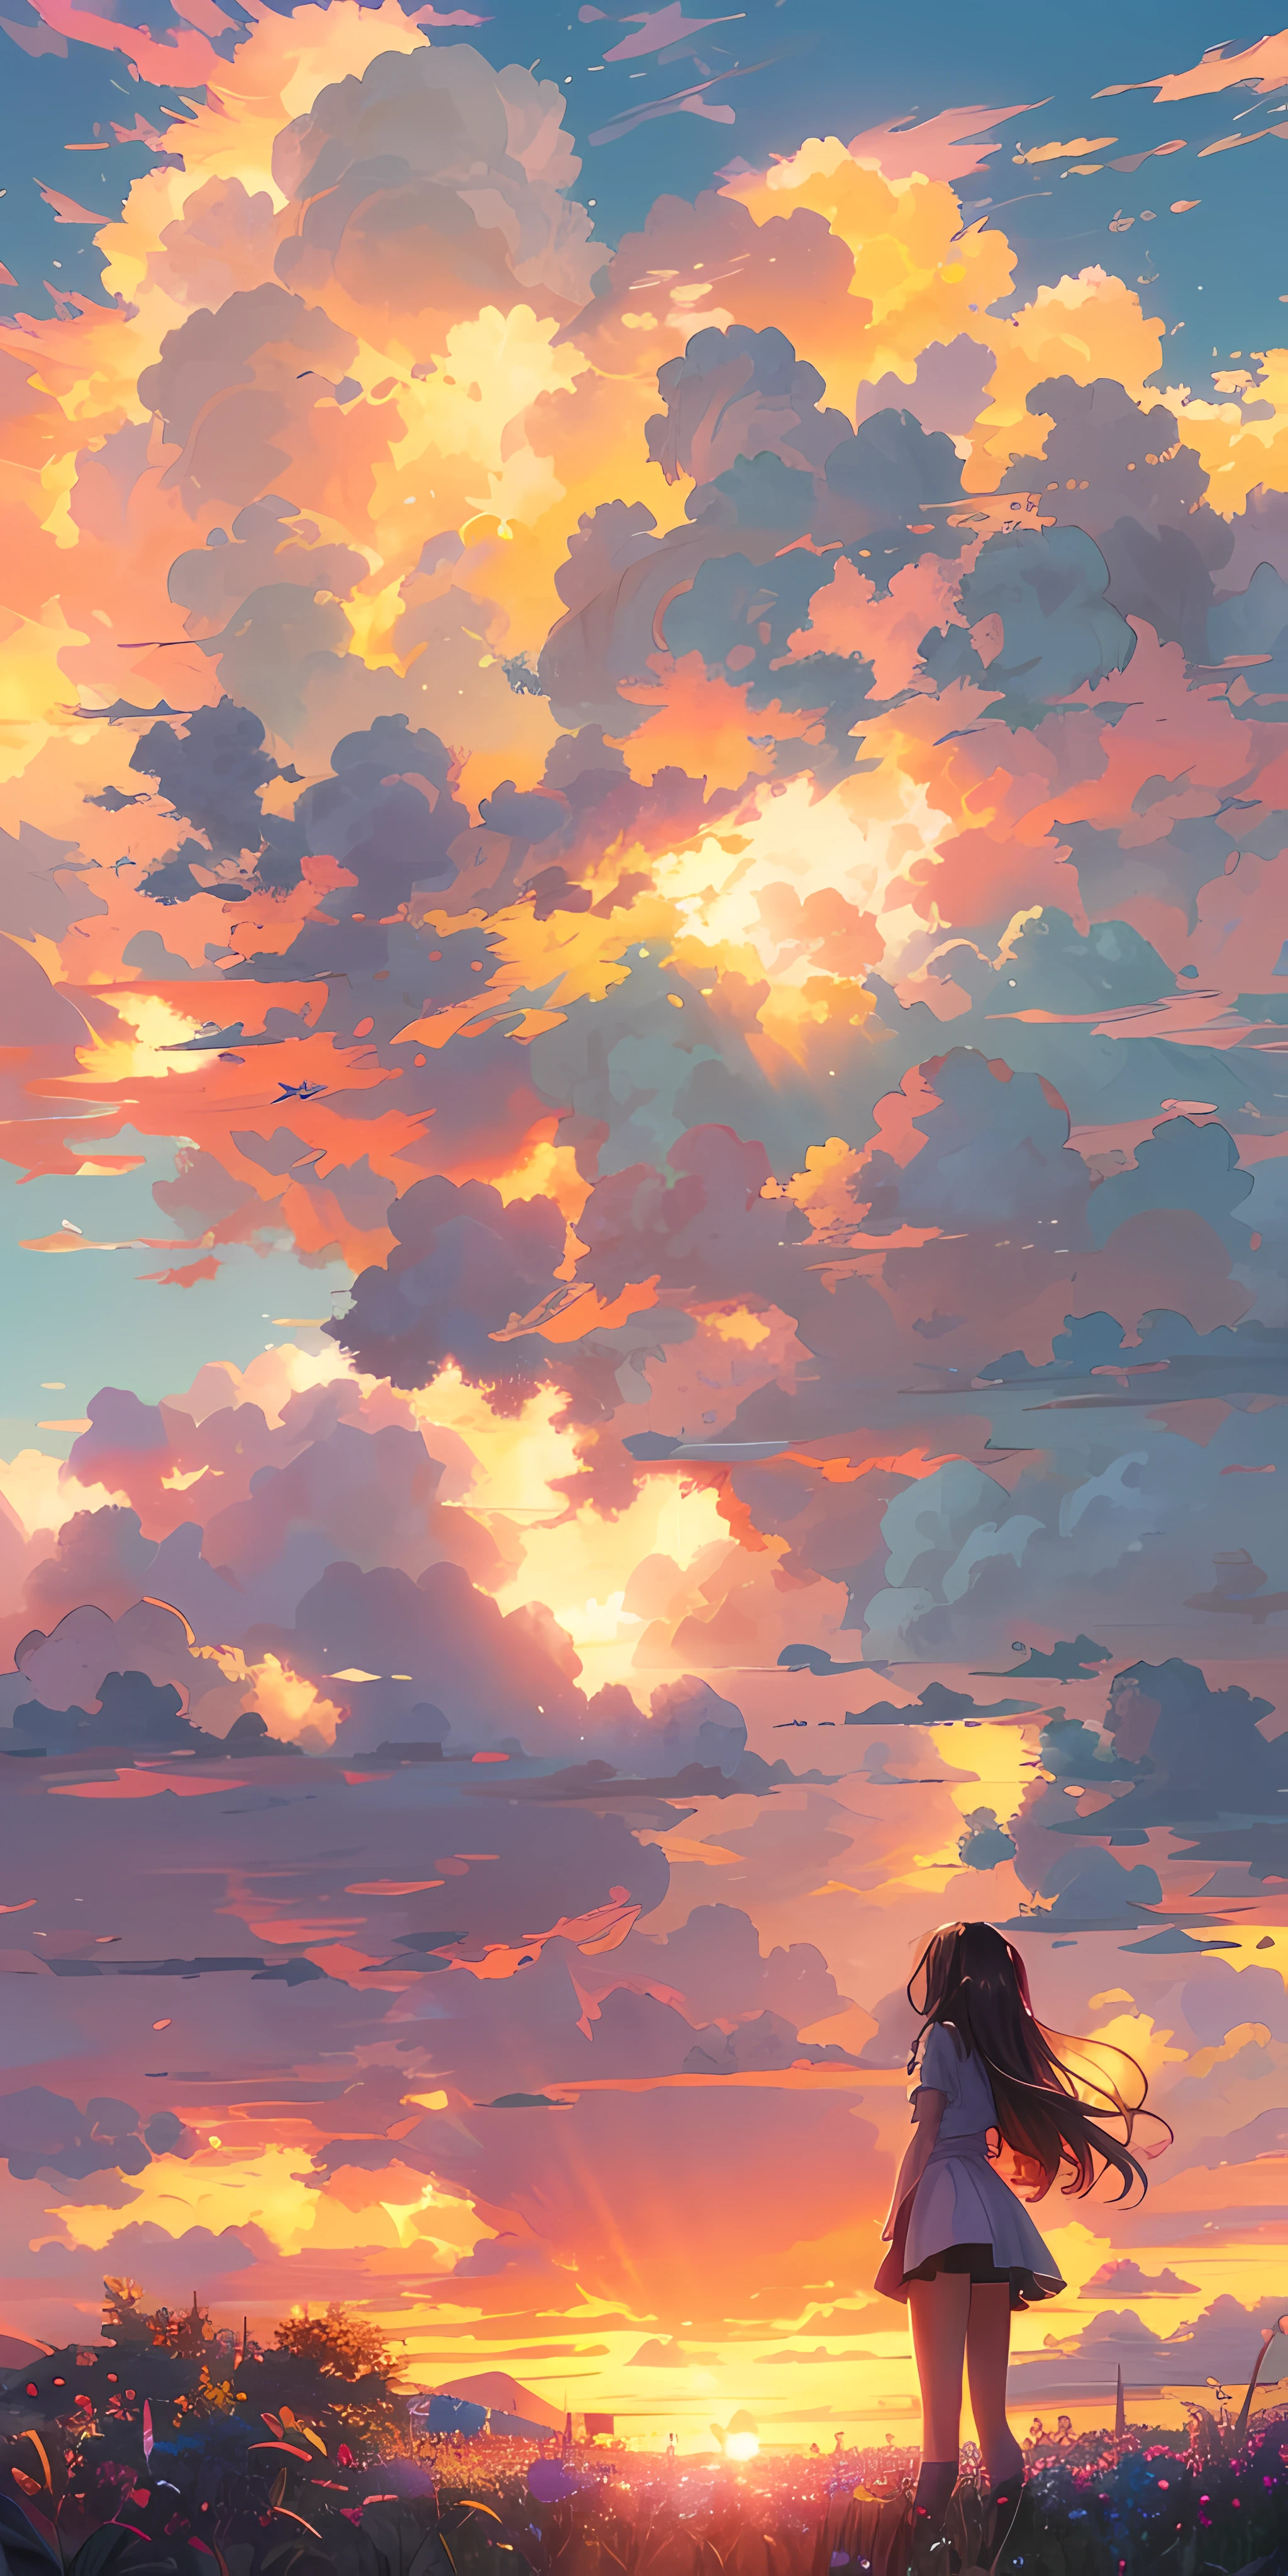 "A captivating sunset moment with a girl enchanted by the magnificent golden sunlight and billowing clouds, evoking a sense of awe and vibrant colors. Masterpiece."